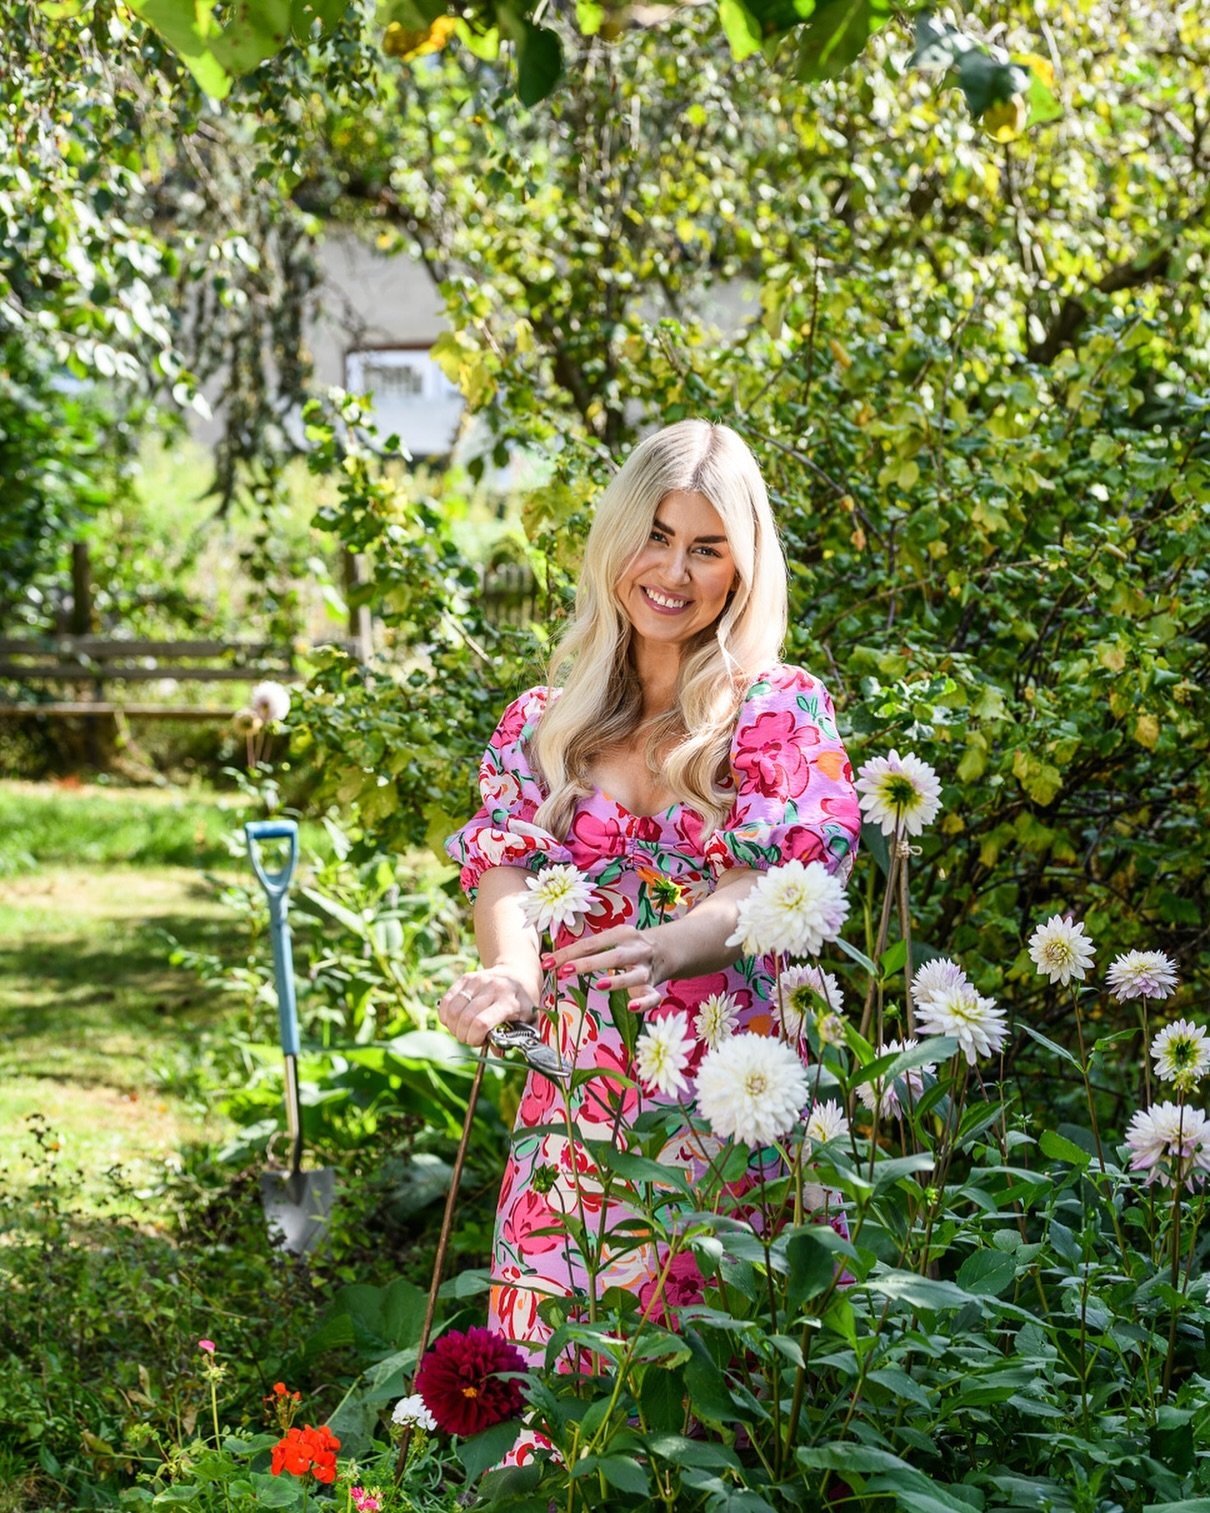 I am SO ready for my garden to feel GREEN again - who&rsquo;s with me?! This wintery weather needs to be gone. We need sunshine, our gardens need sunshine. All we&rsquo;re asking for is for ONE good weather weekend so we can reacquaint ourselves prop